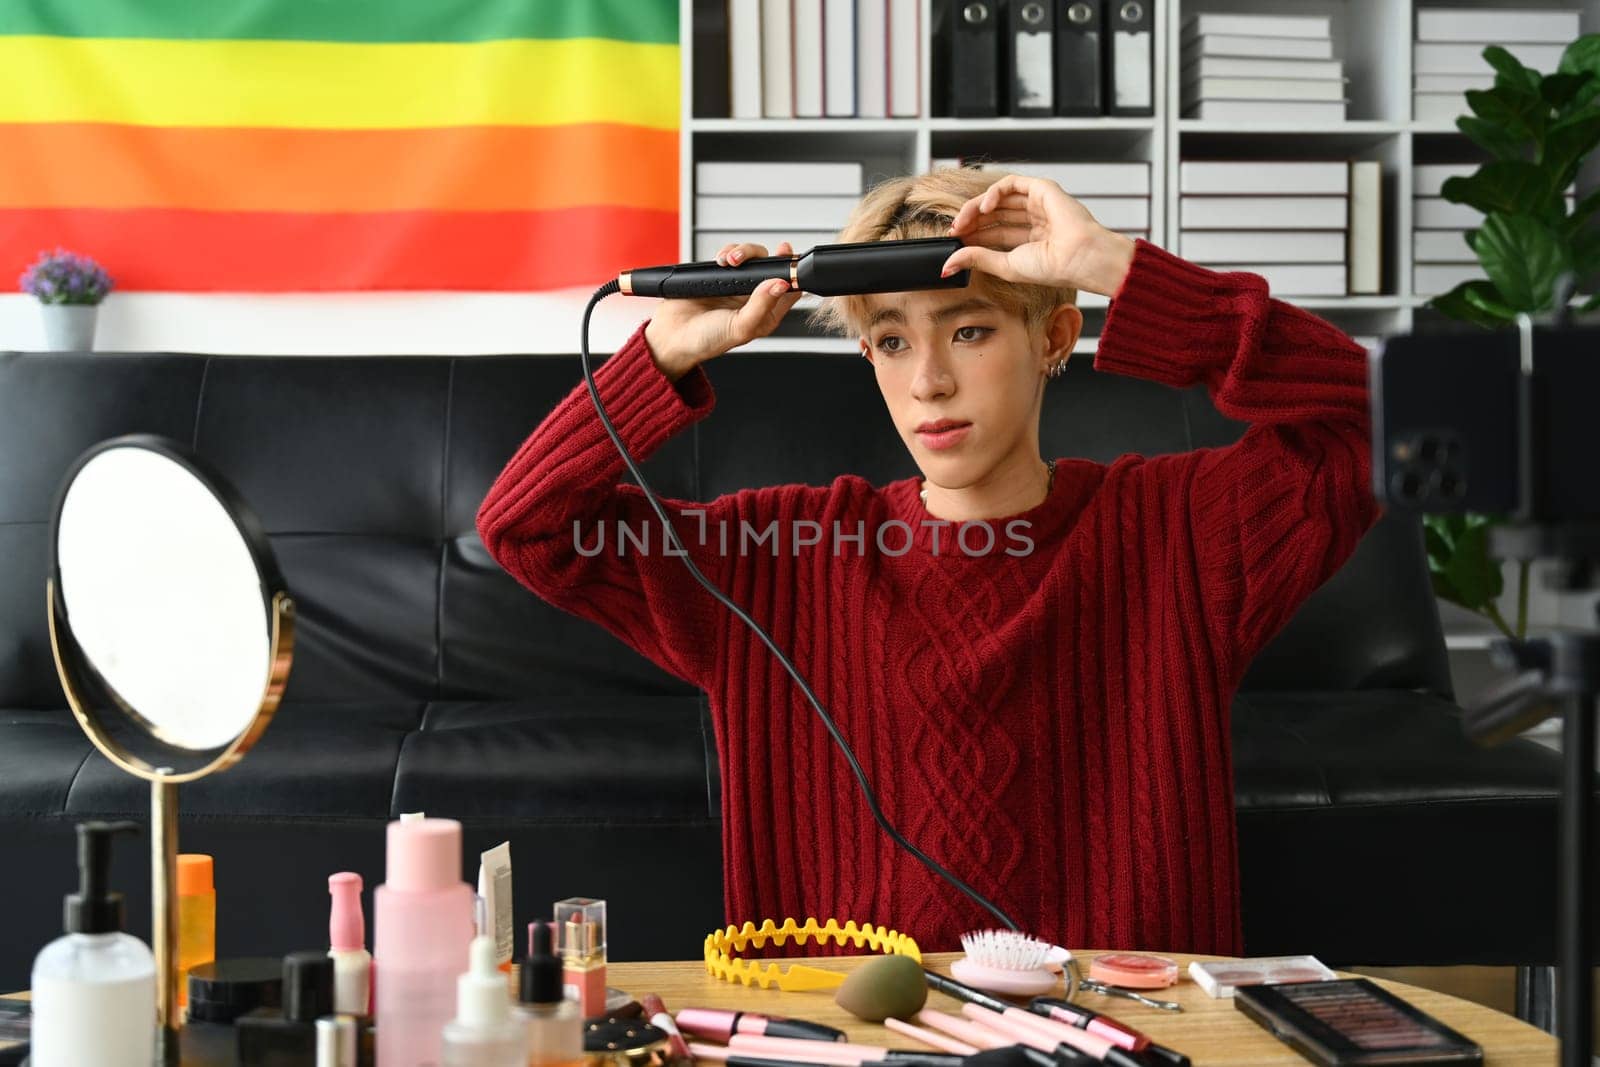 Attractive young gay man in red sweater straightening hair with flat iron. LGBTQ, domestic life, fashion and beauty concept.